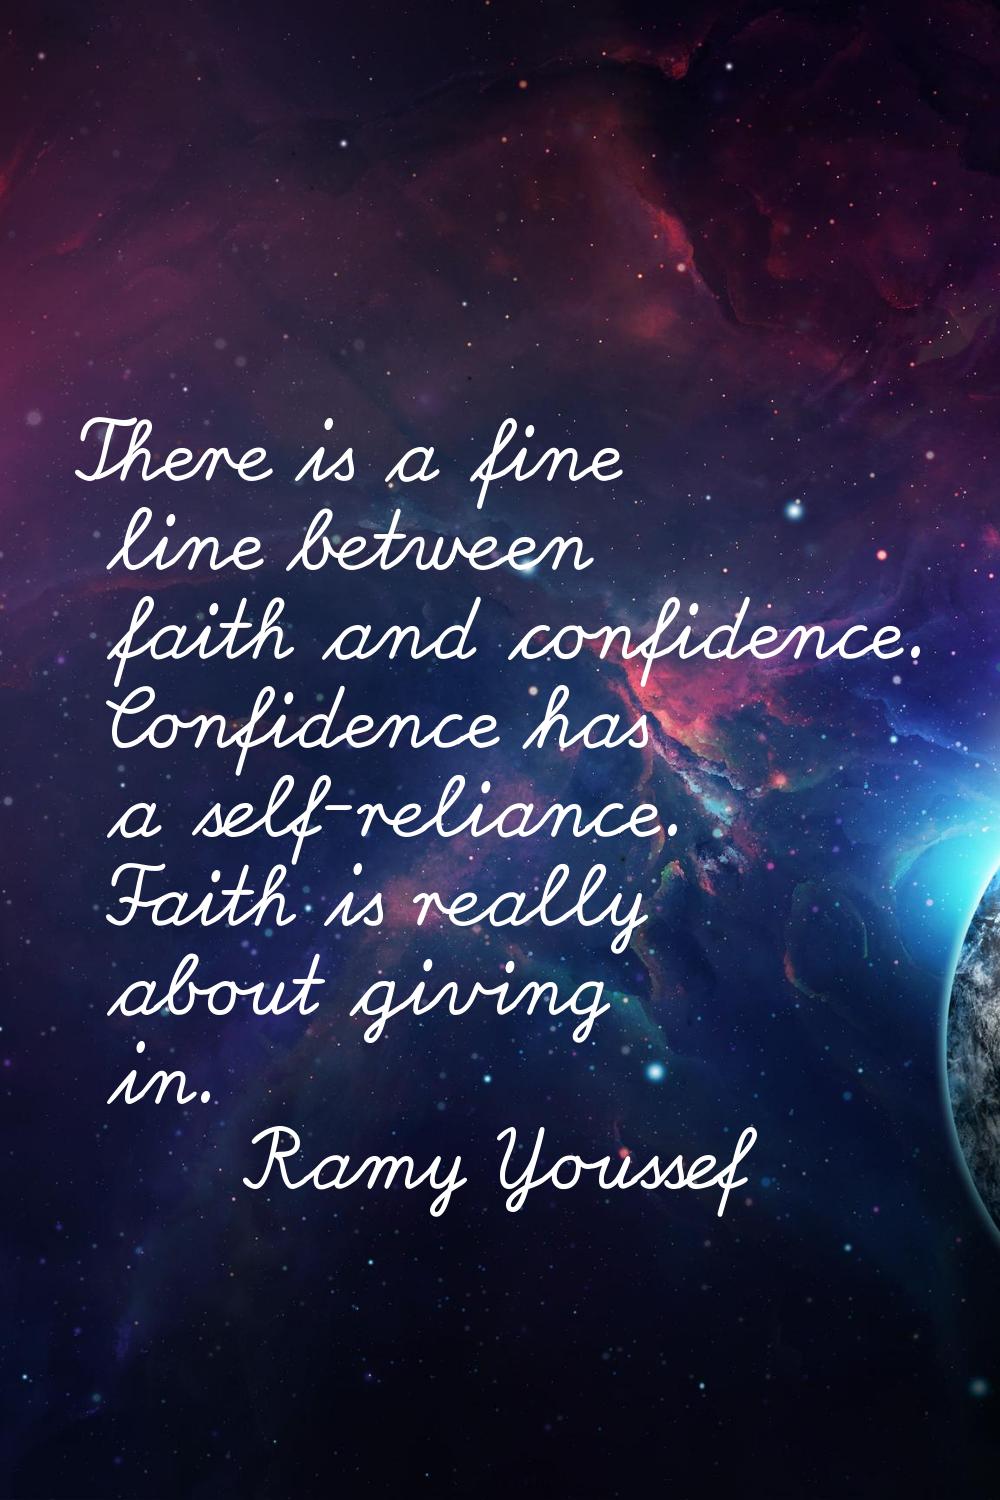 There is a fine line between faith and confidence. Confidence has a self-reliance. Faith is really 